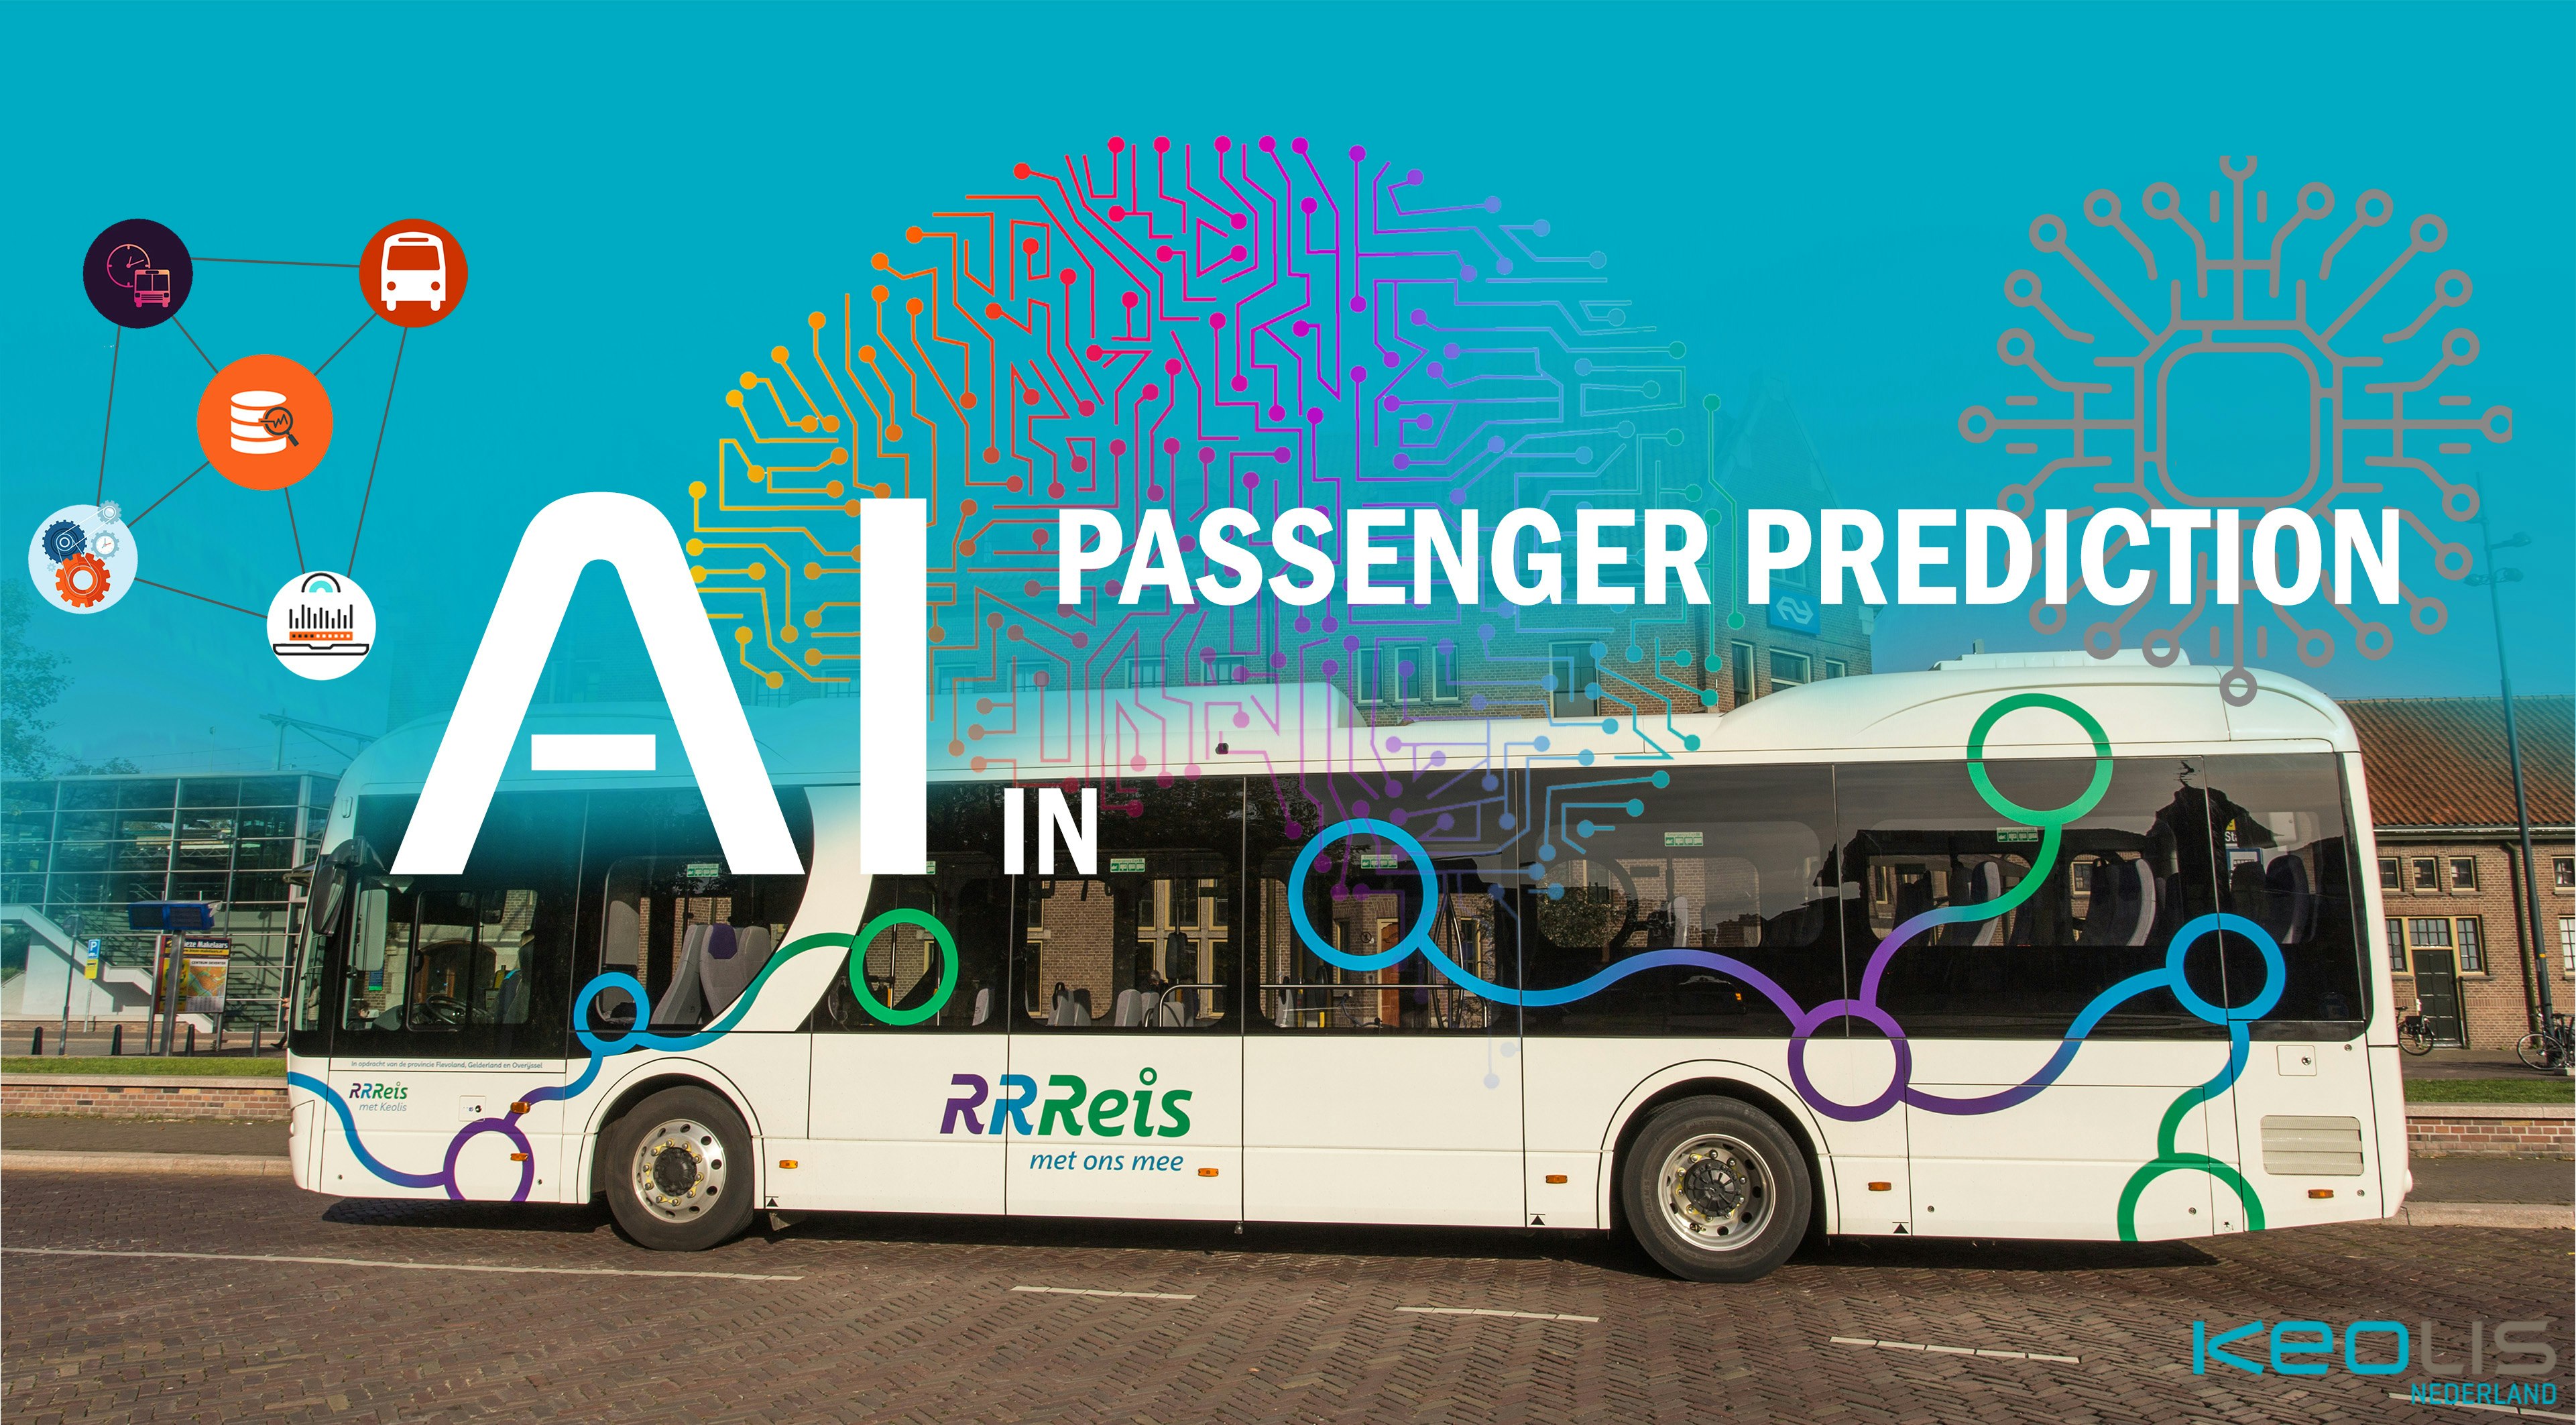 Photo montage of a bus with the inscription "AI in Passenger Prediction 